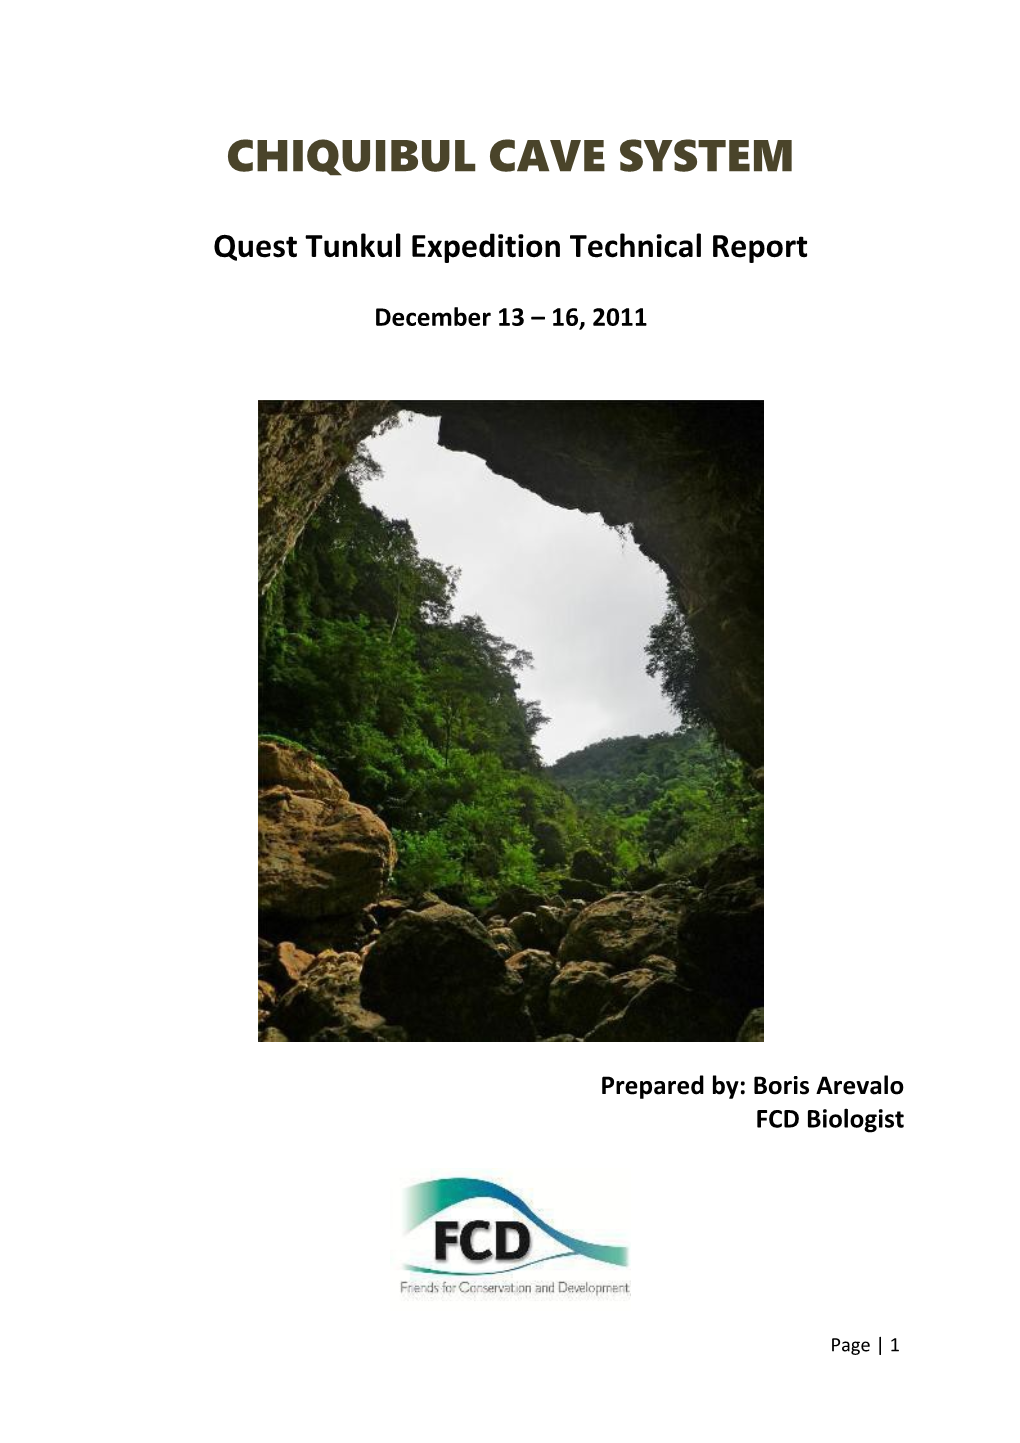 Quest Tunkul Expedition Technical Report